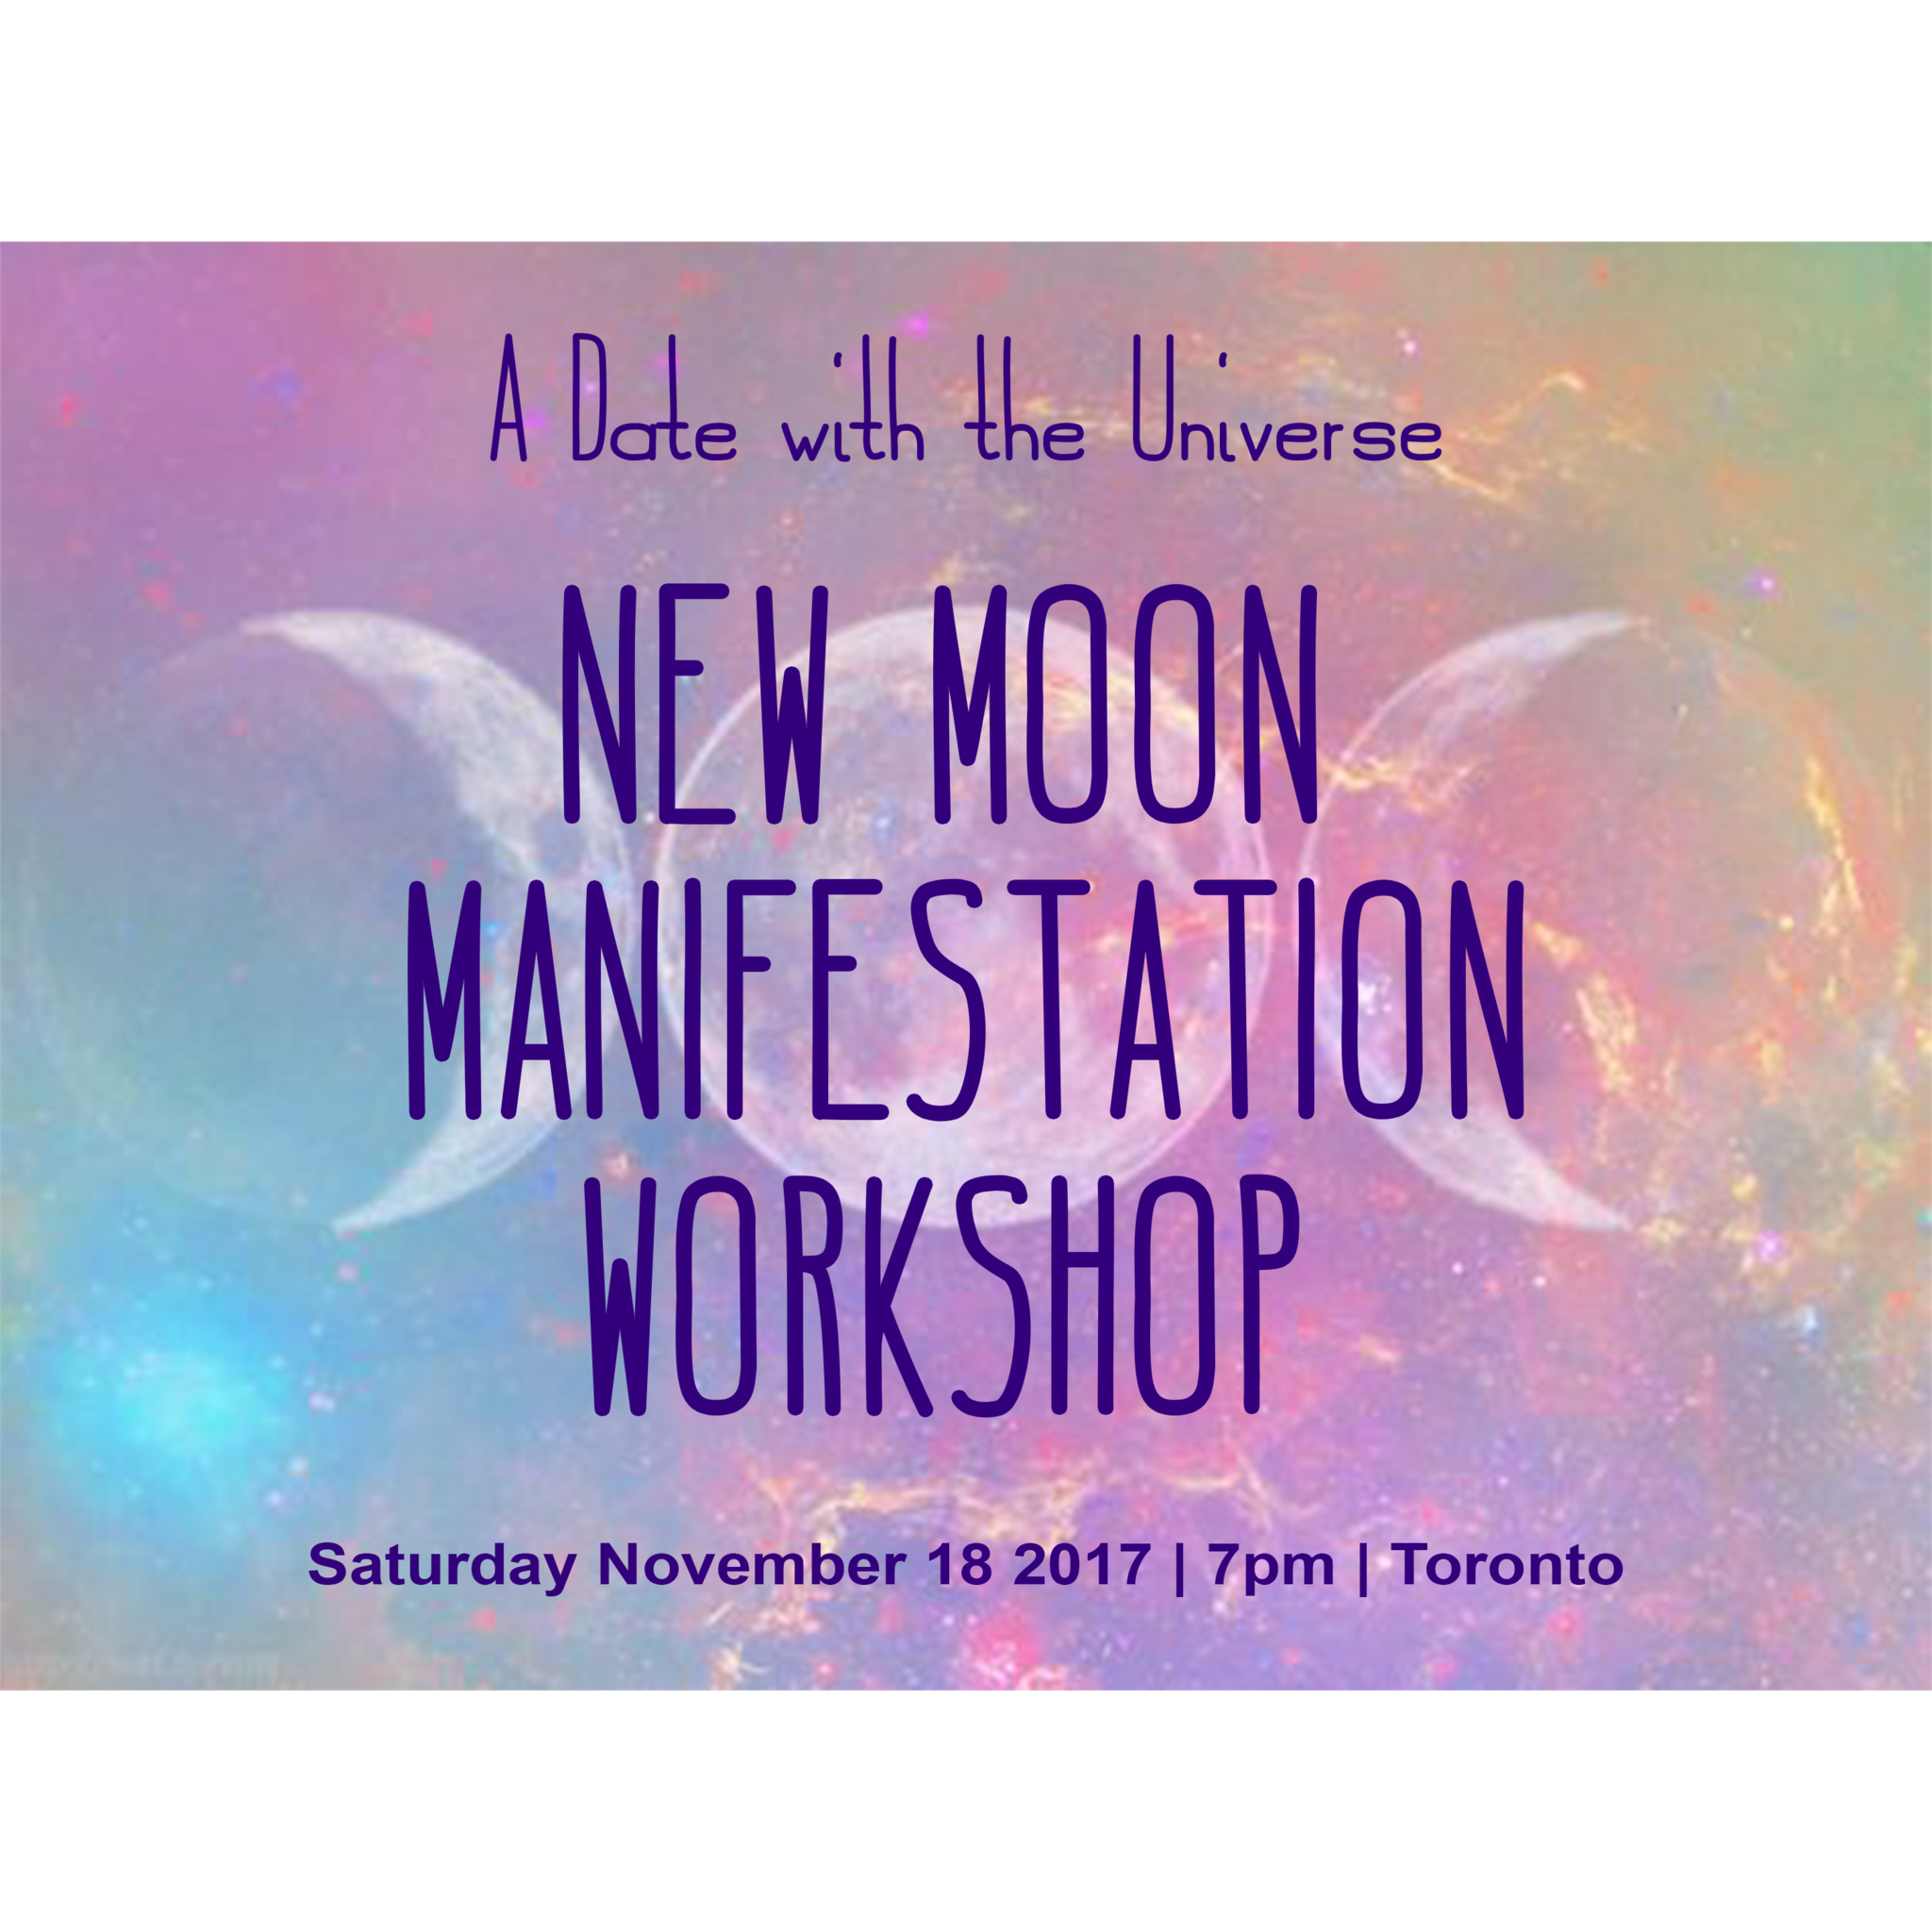 A Date with the Universe New Moon Manifestation